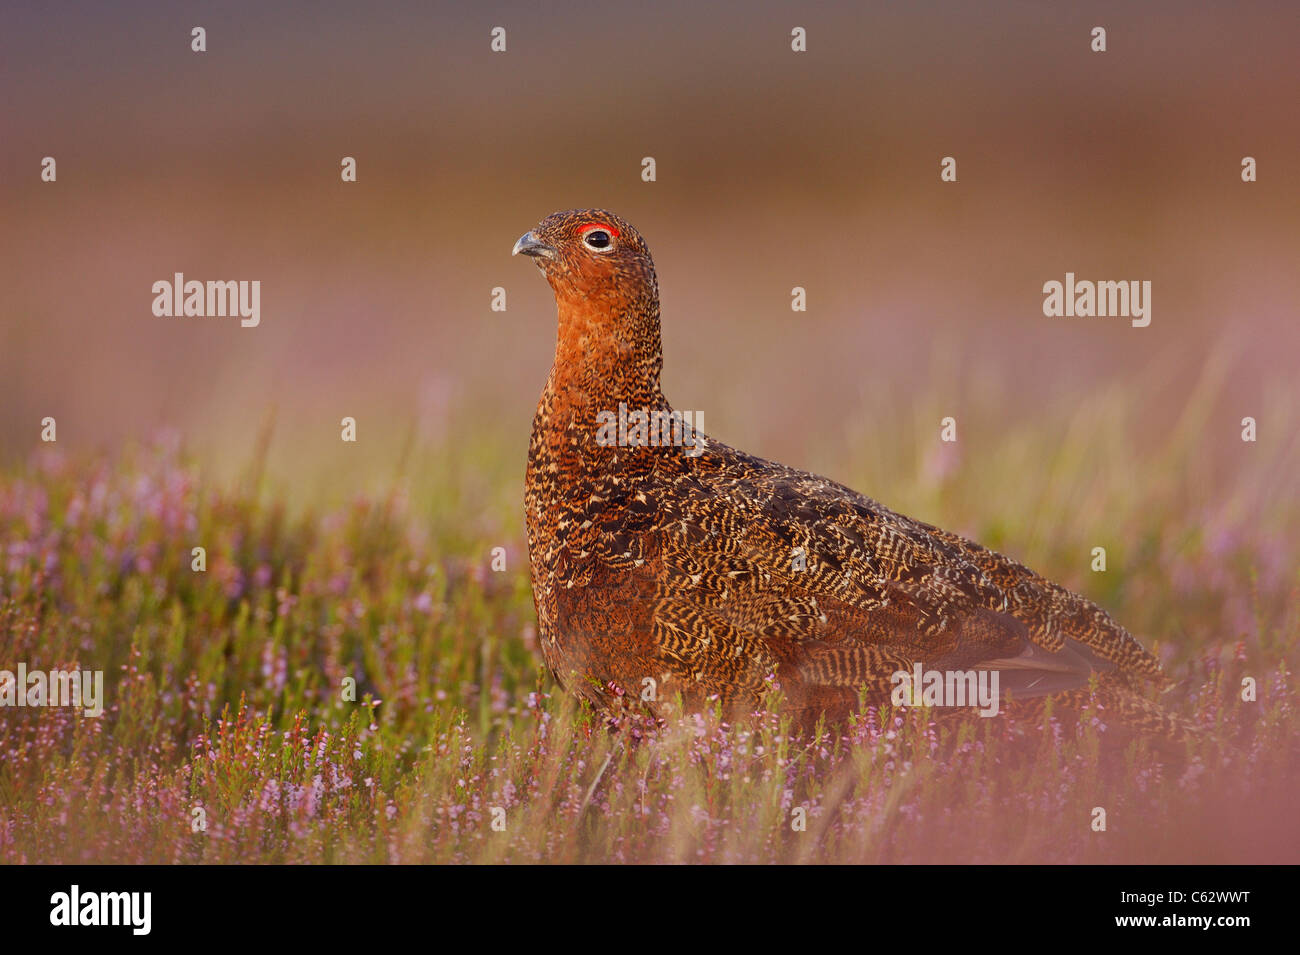 RED GROUSE Lagopus lagopus scoticus  An adult male among flowering heather  Yorkshire Dales National Park, Yorkshire, UK Stock Photo